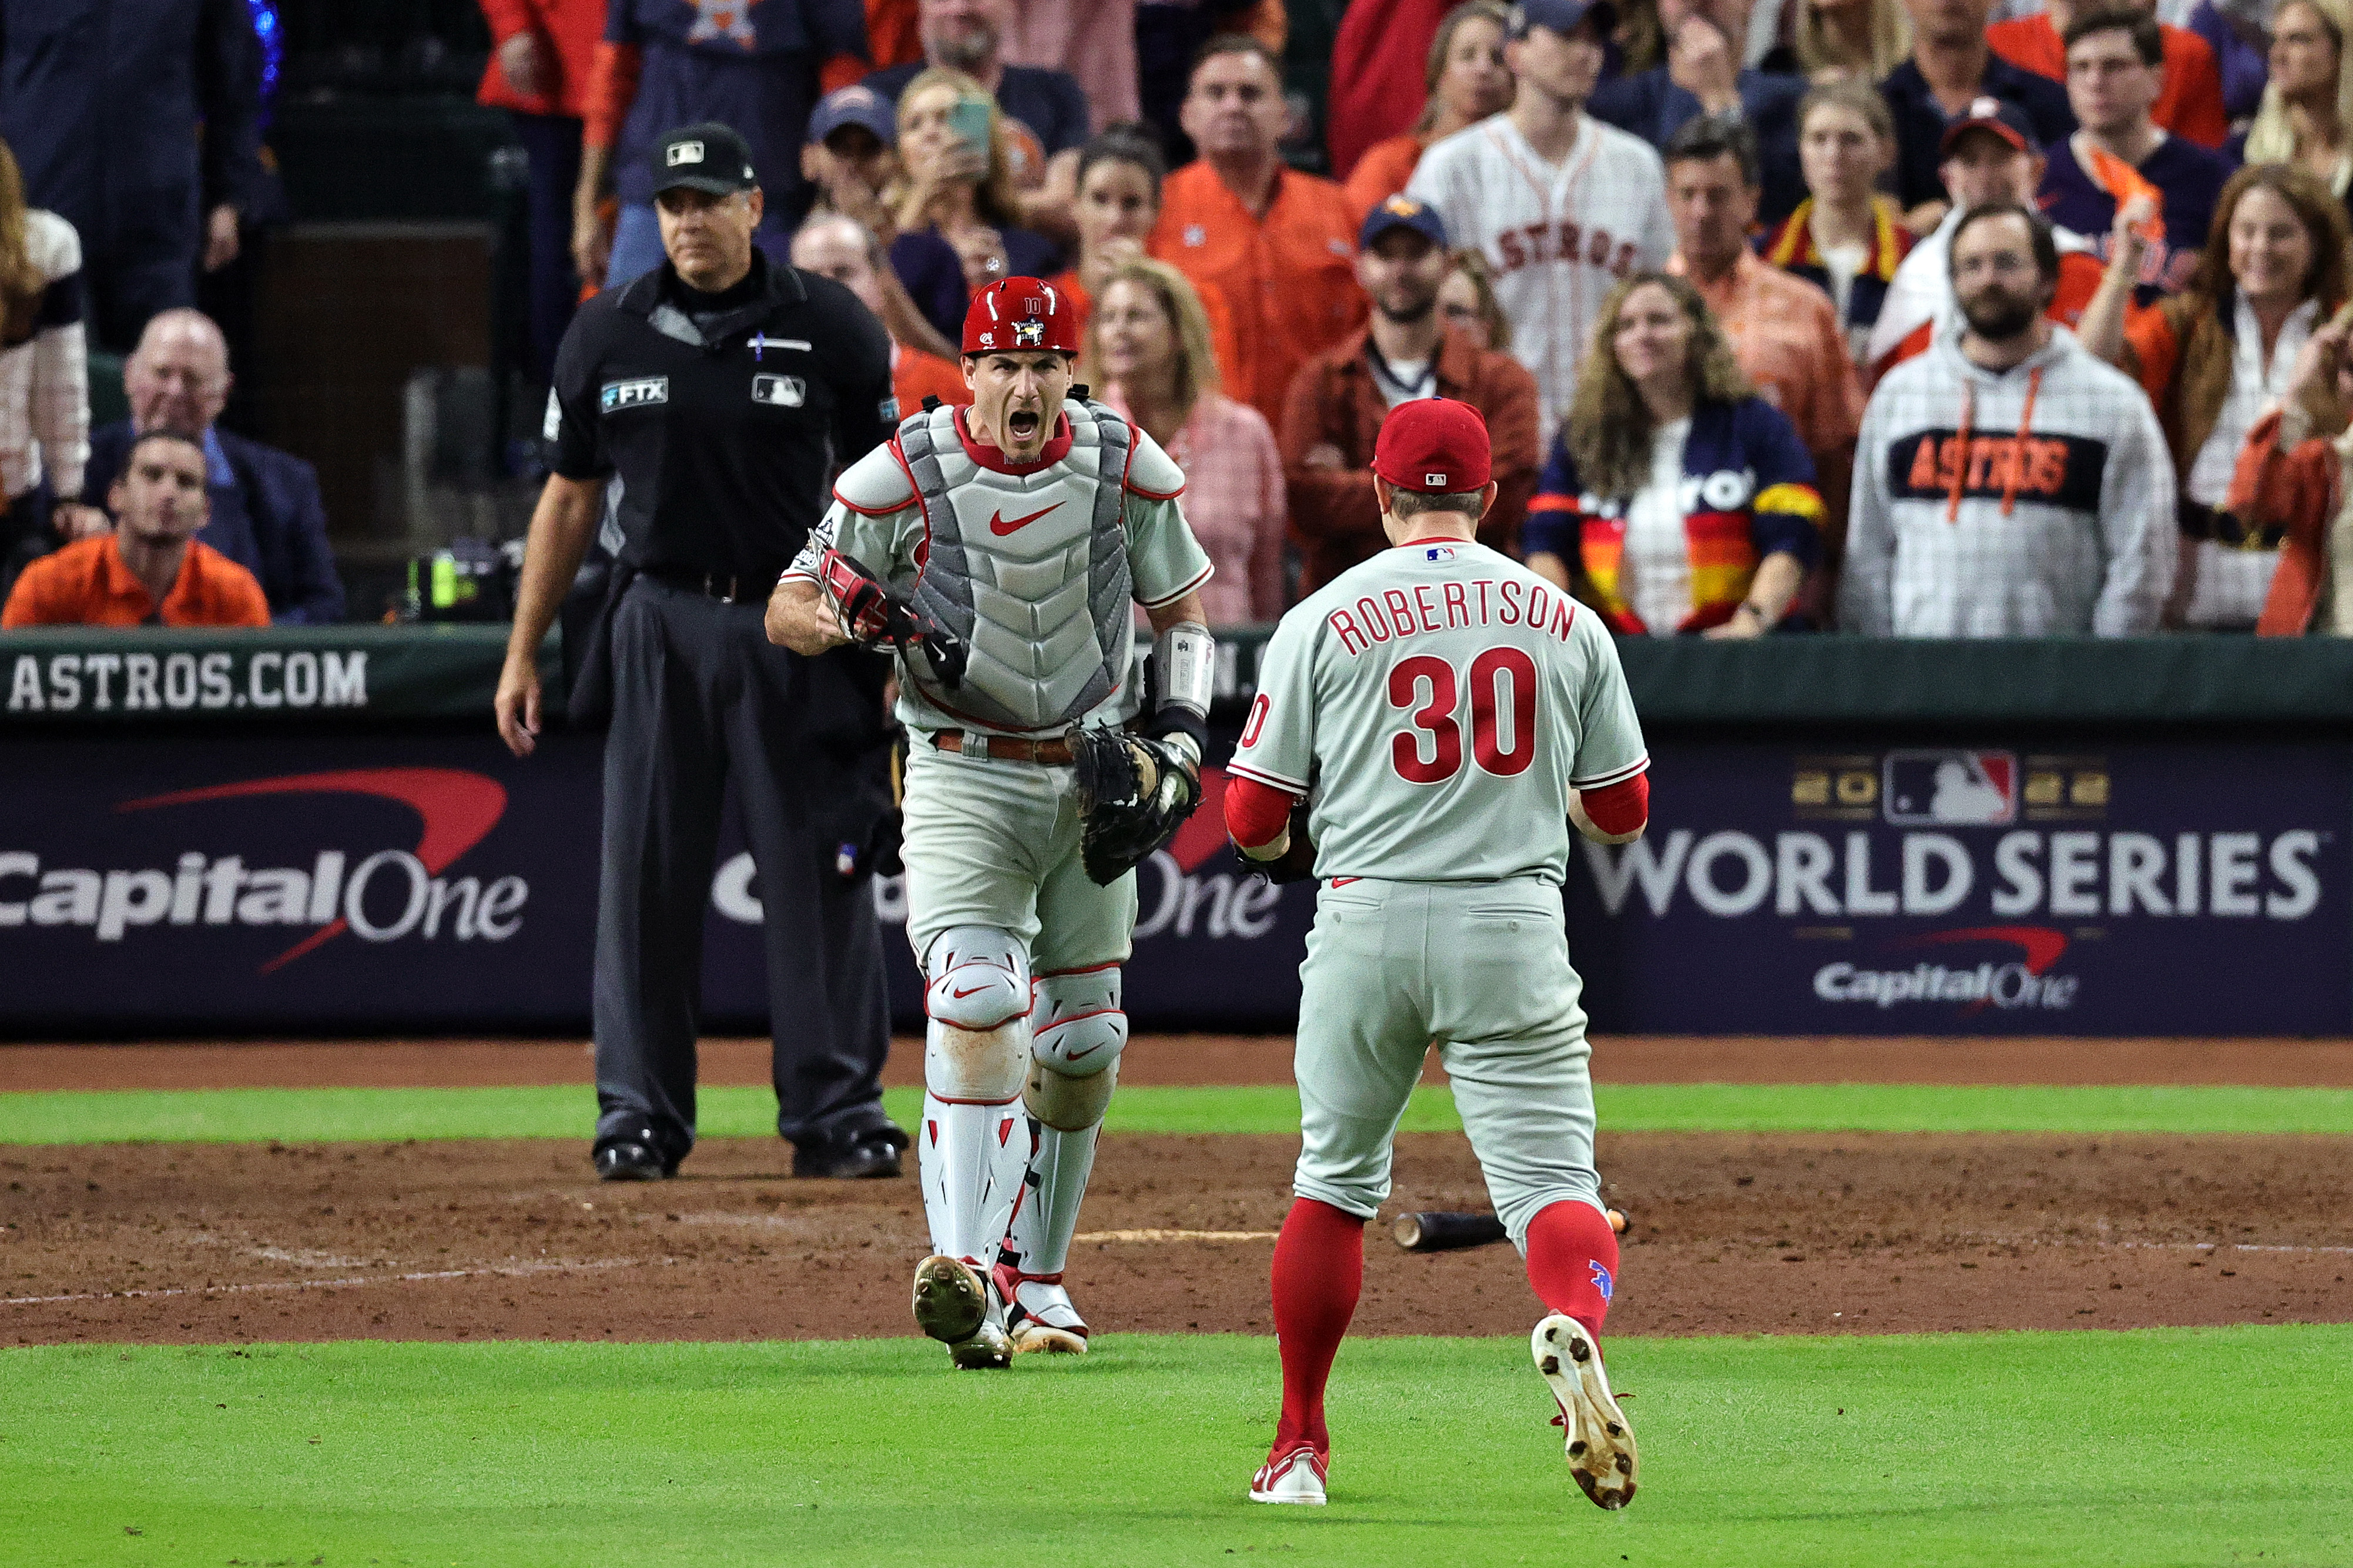 World Series Game 2 simulation: Astros hold off Phillies in 6-5 win